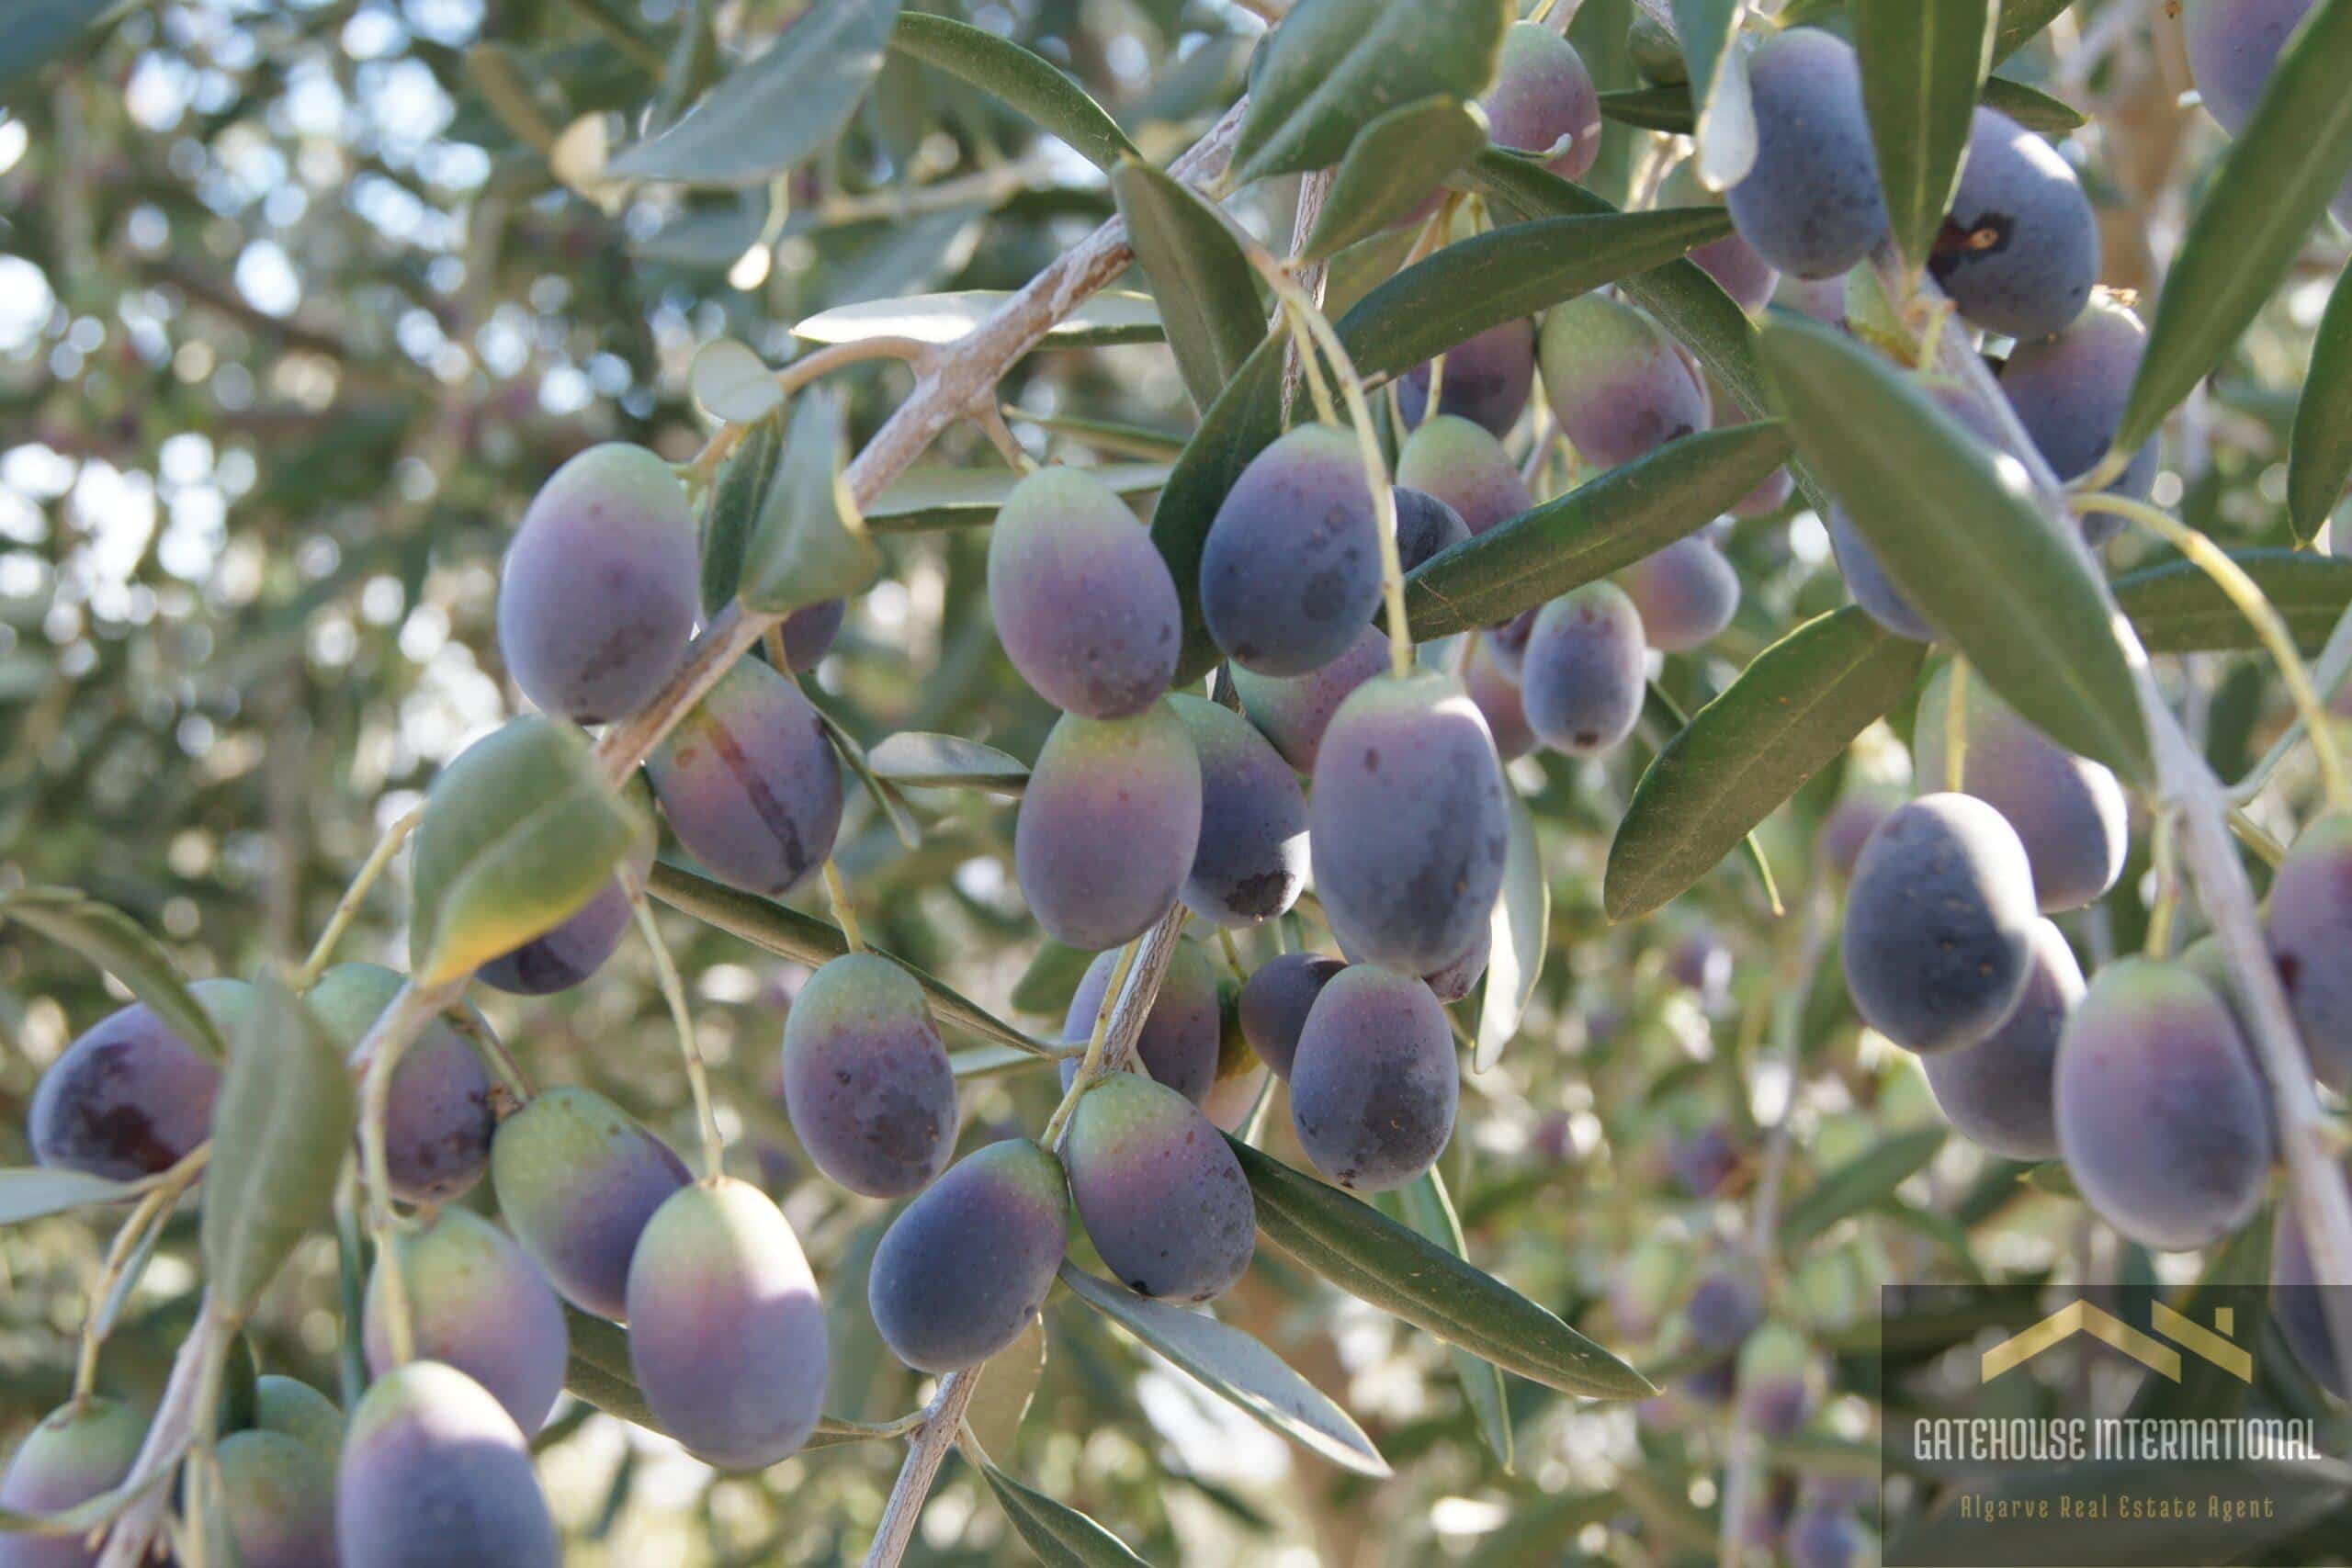 The Algarve is the Perfect Location for Growing Olive Trees
